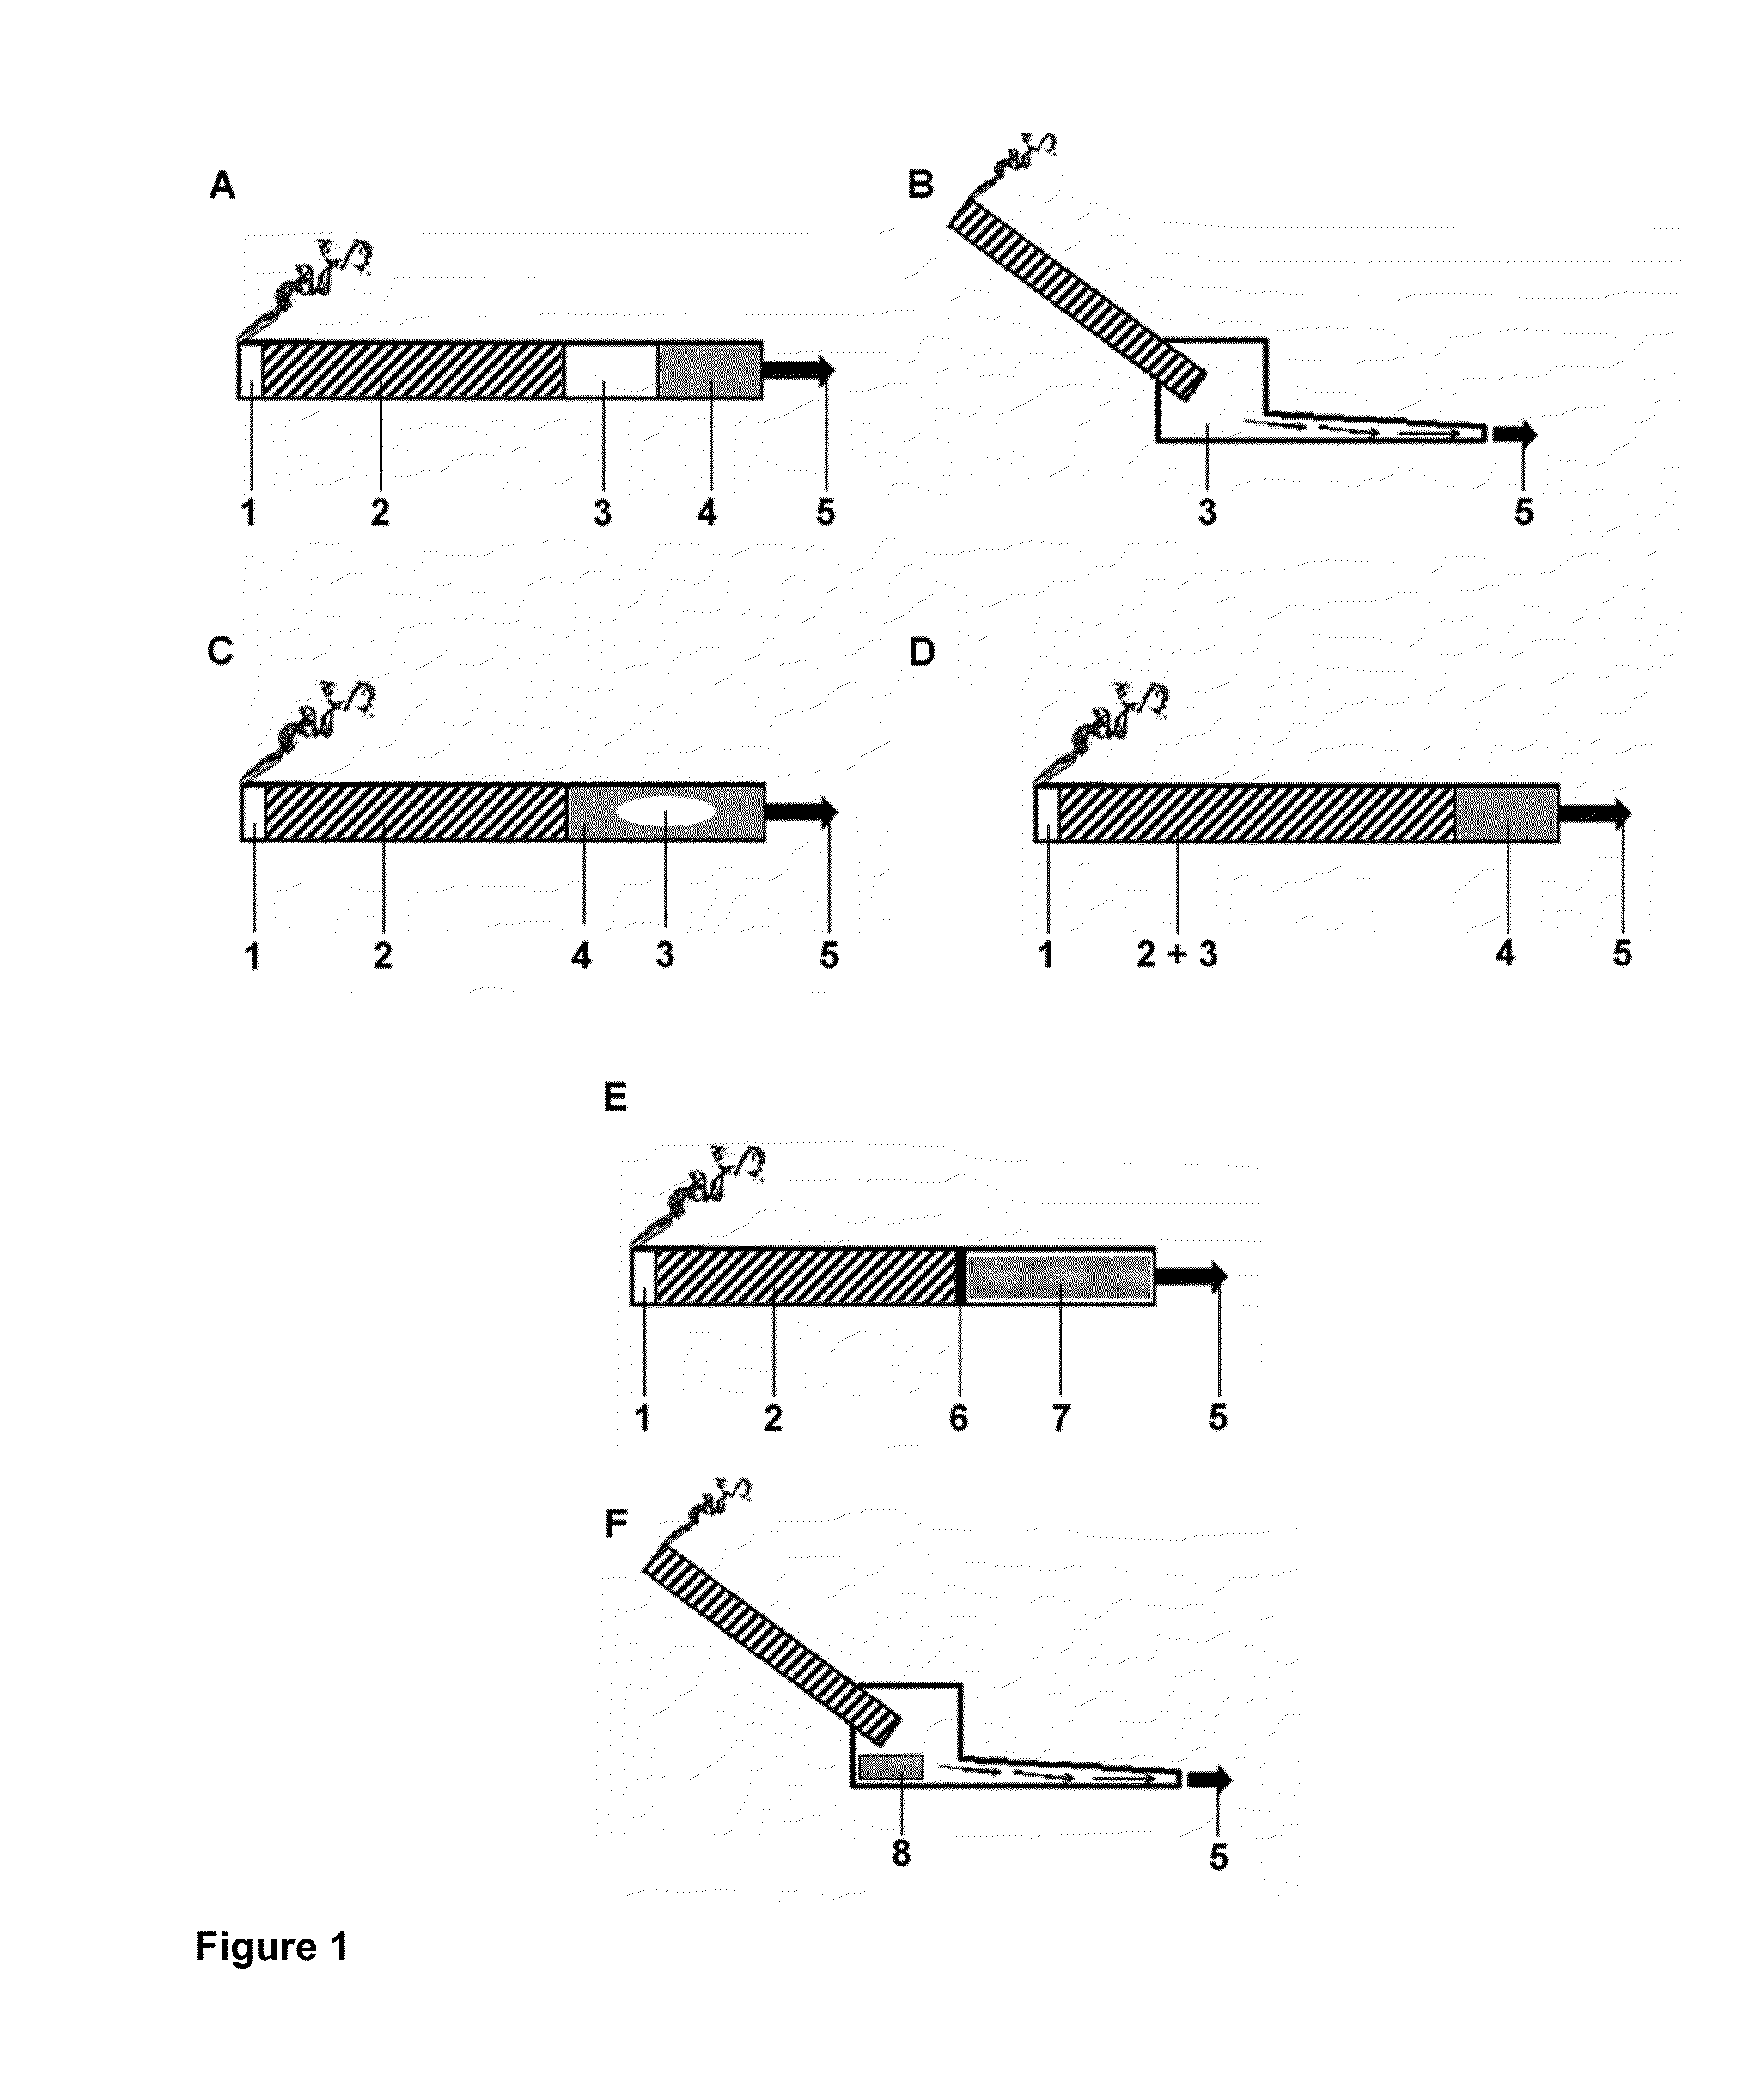 Product comprising a nicotine-containing material and an Anti-cancer agent